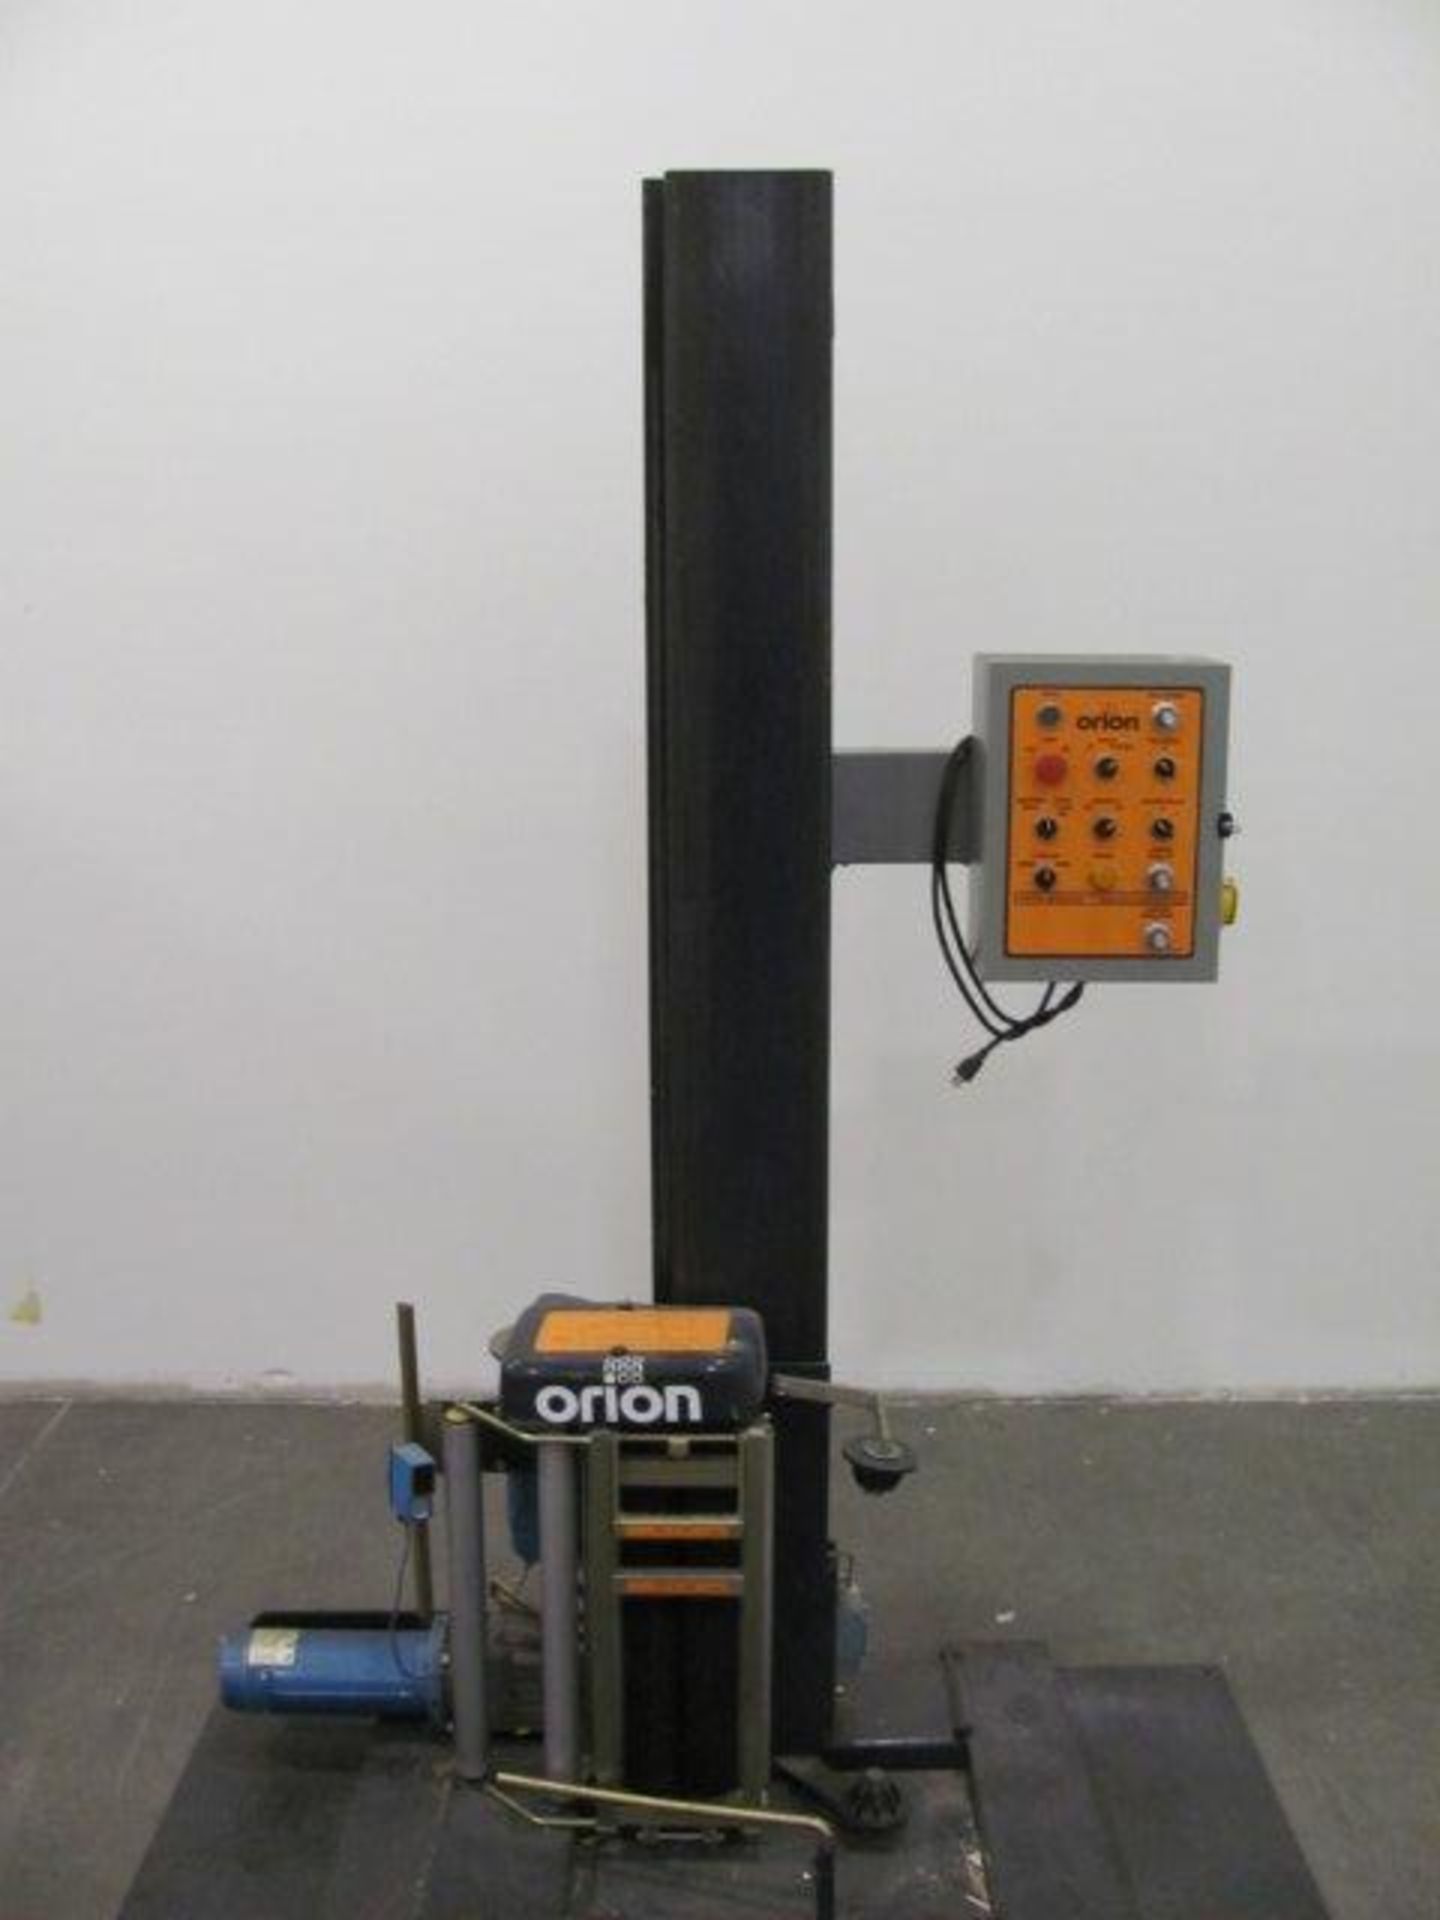 Orion Packaging Pallet Wrapping Machine - Image 2 of 4